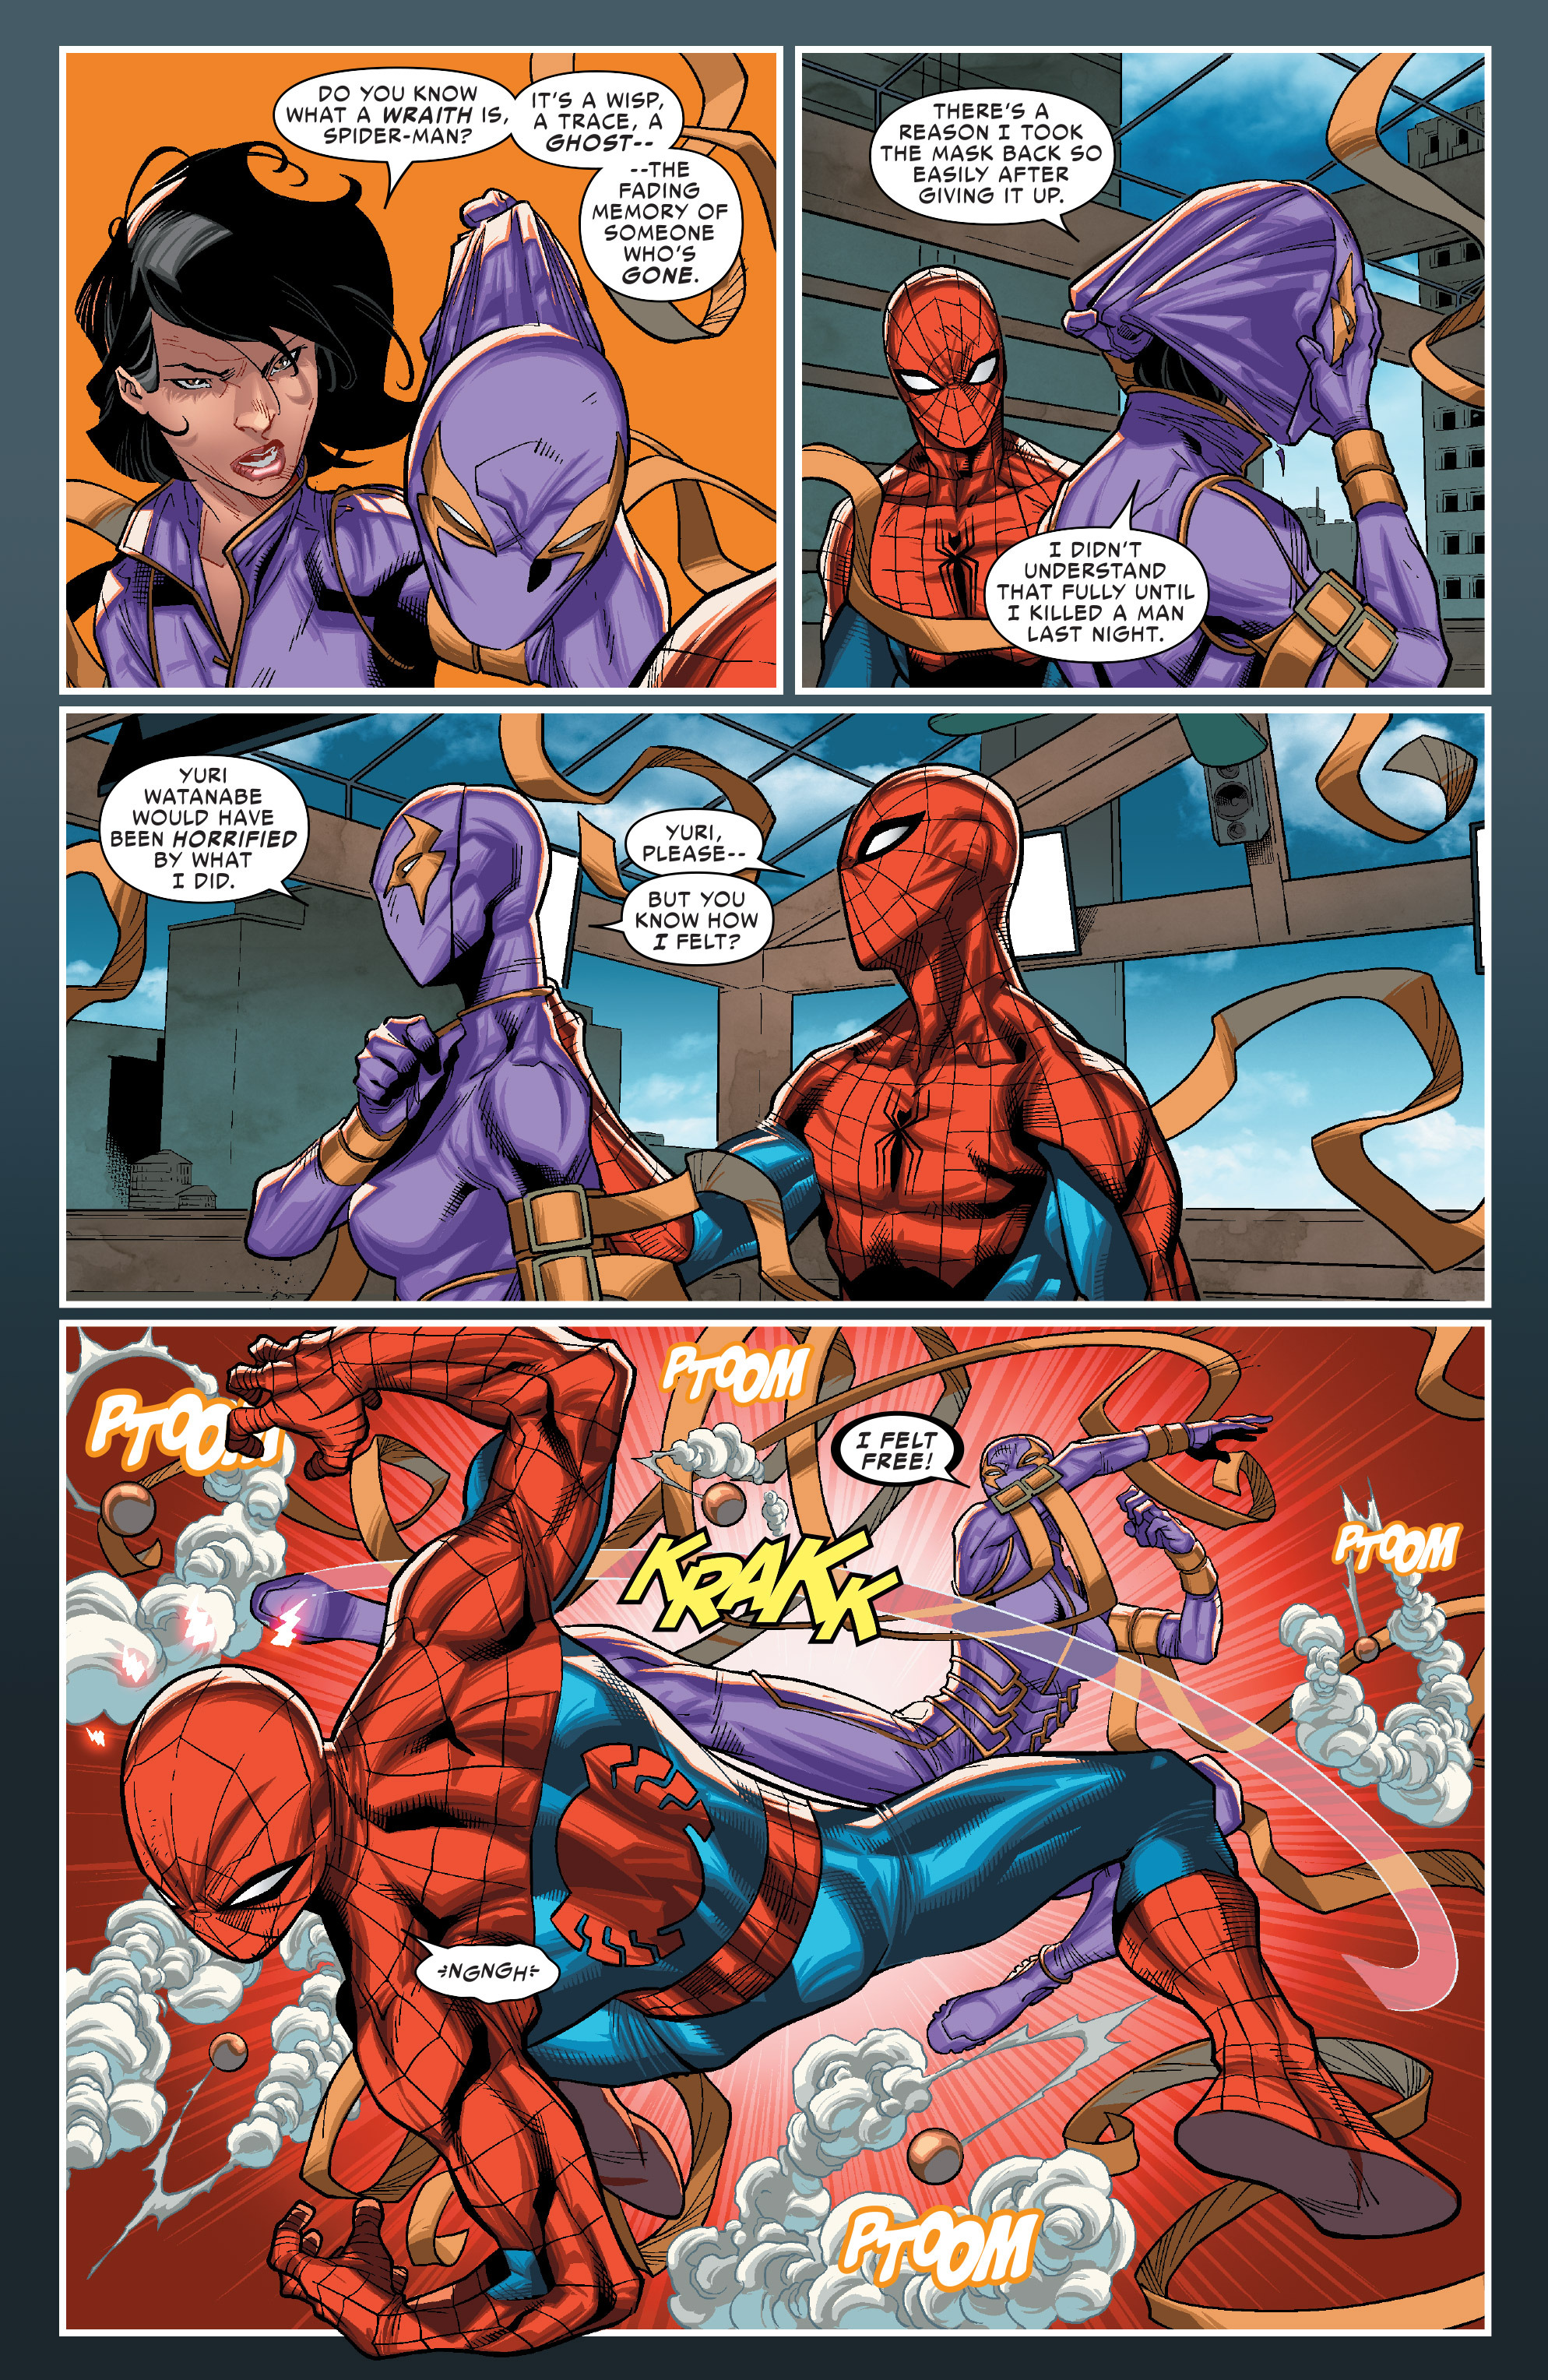 The Amazing Spider-Man (2014) issue 20.1 - Page 13